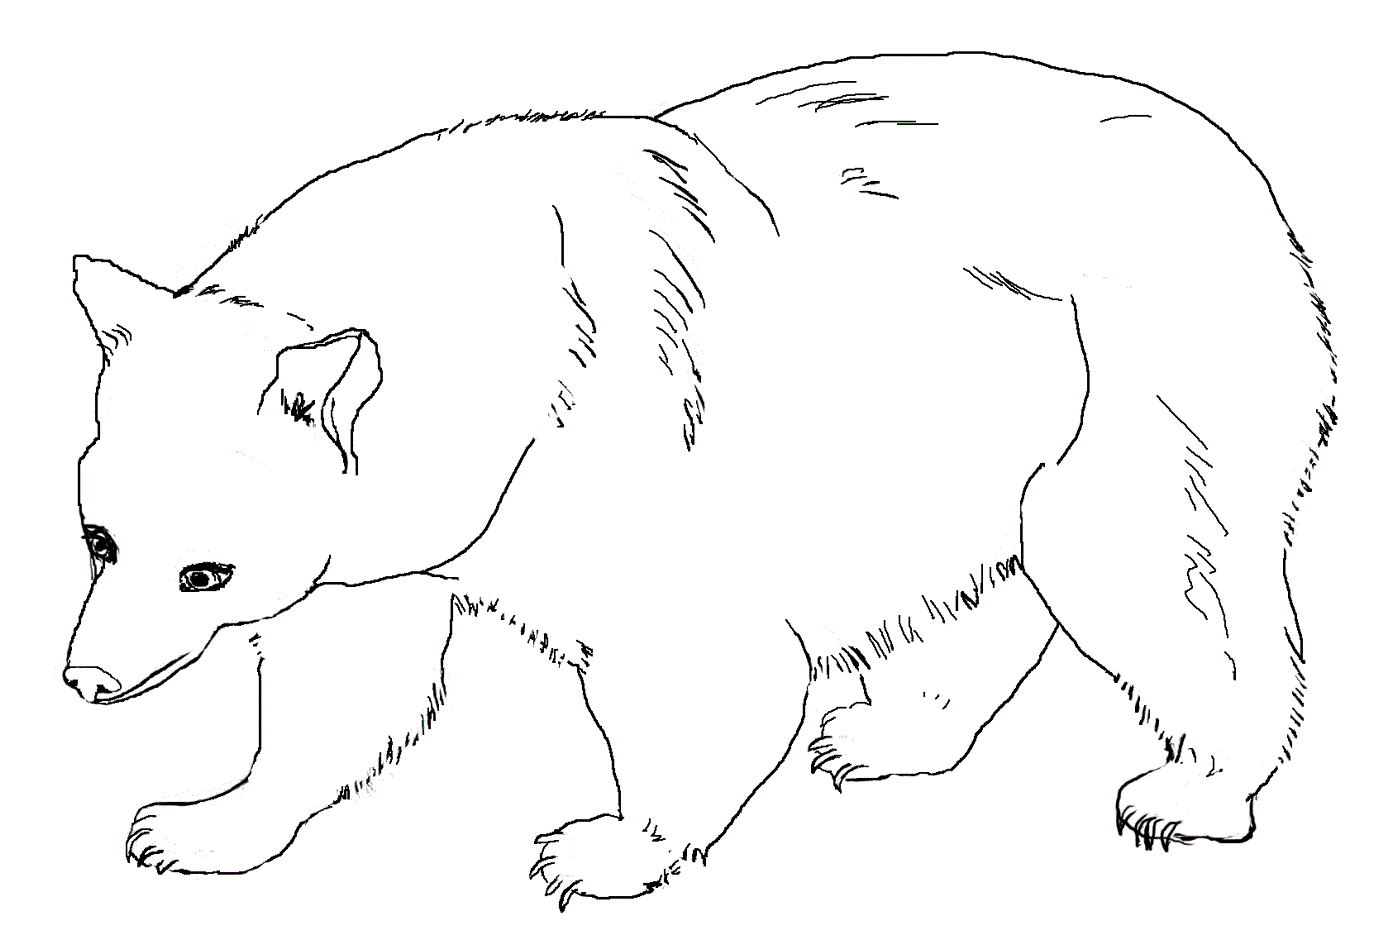 free-printable-bear-coloring-pages-for-kids